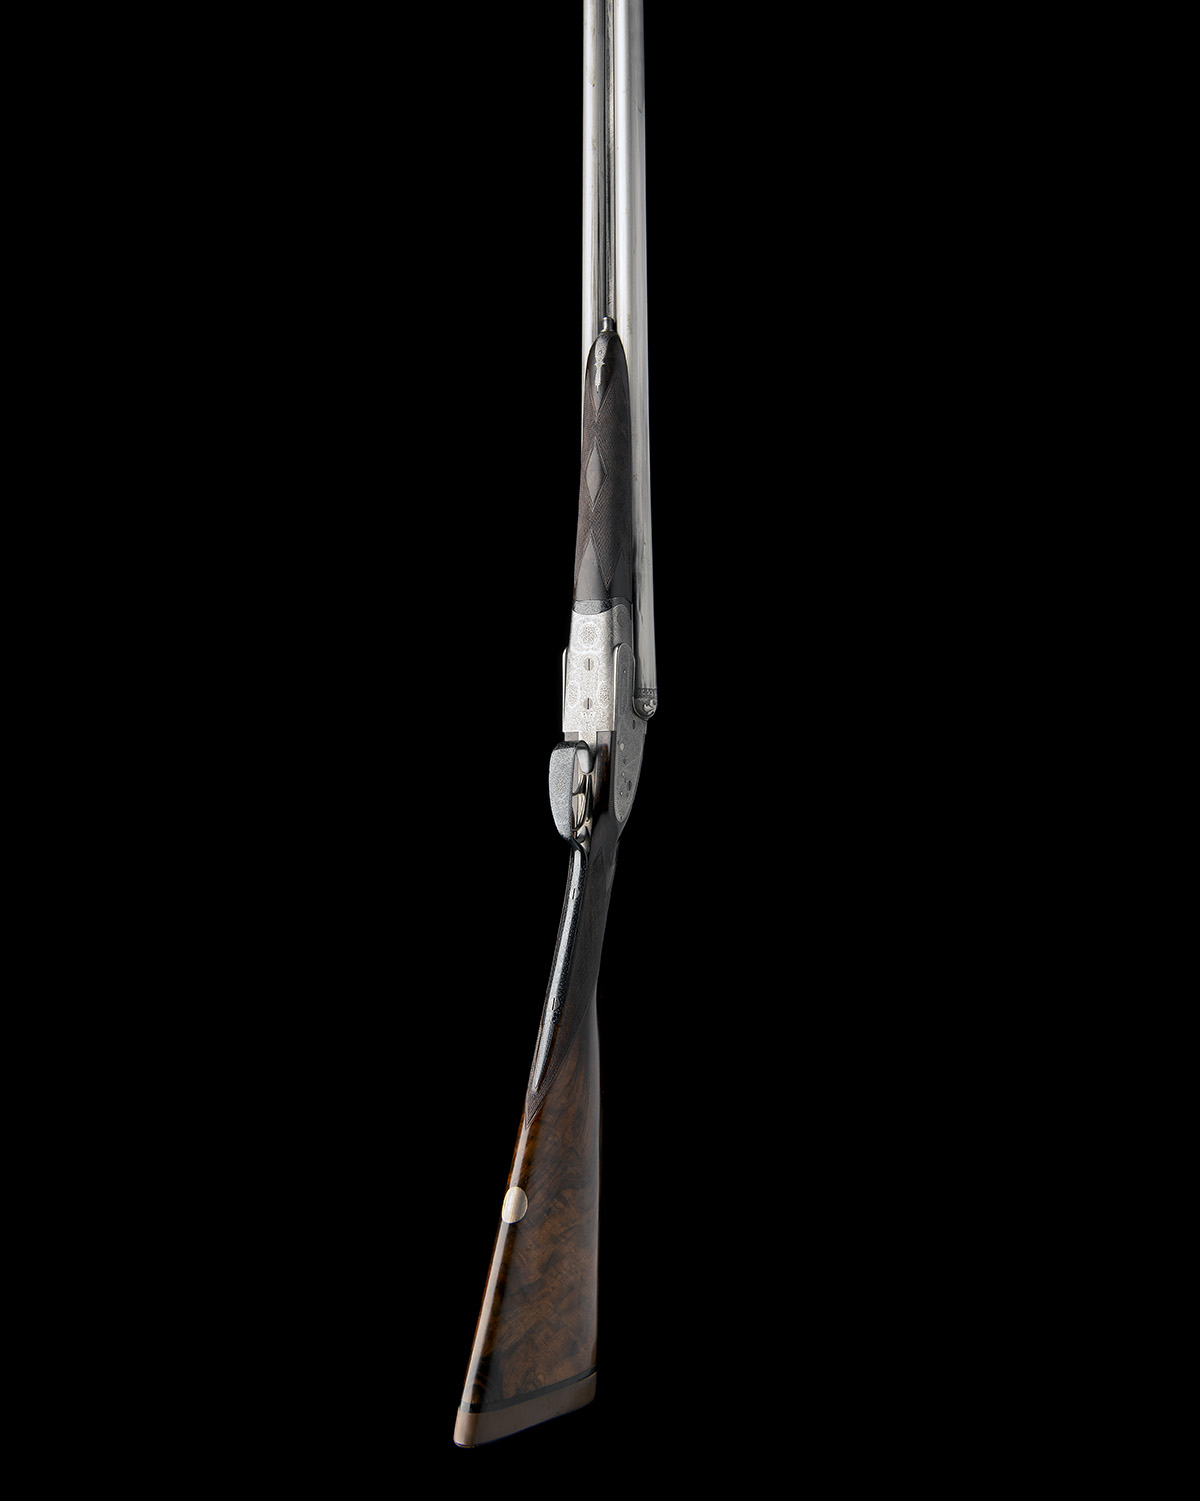 WM. LEECH & SONS A 12-BORE SIDELOCK EJECTOR, serial no. 3814, 26in. nitro reproved (in 2020, - Image 8 of 10